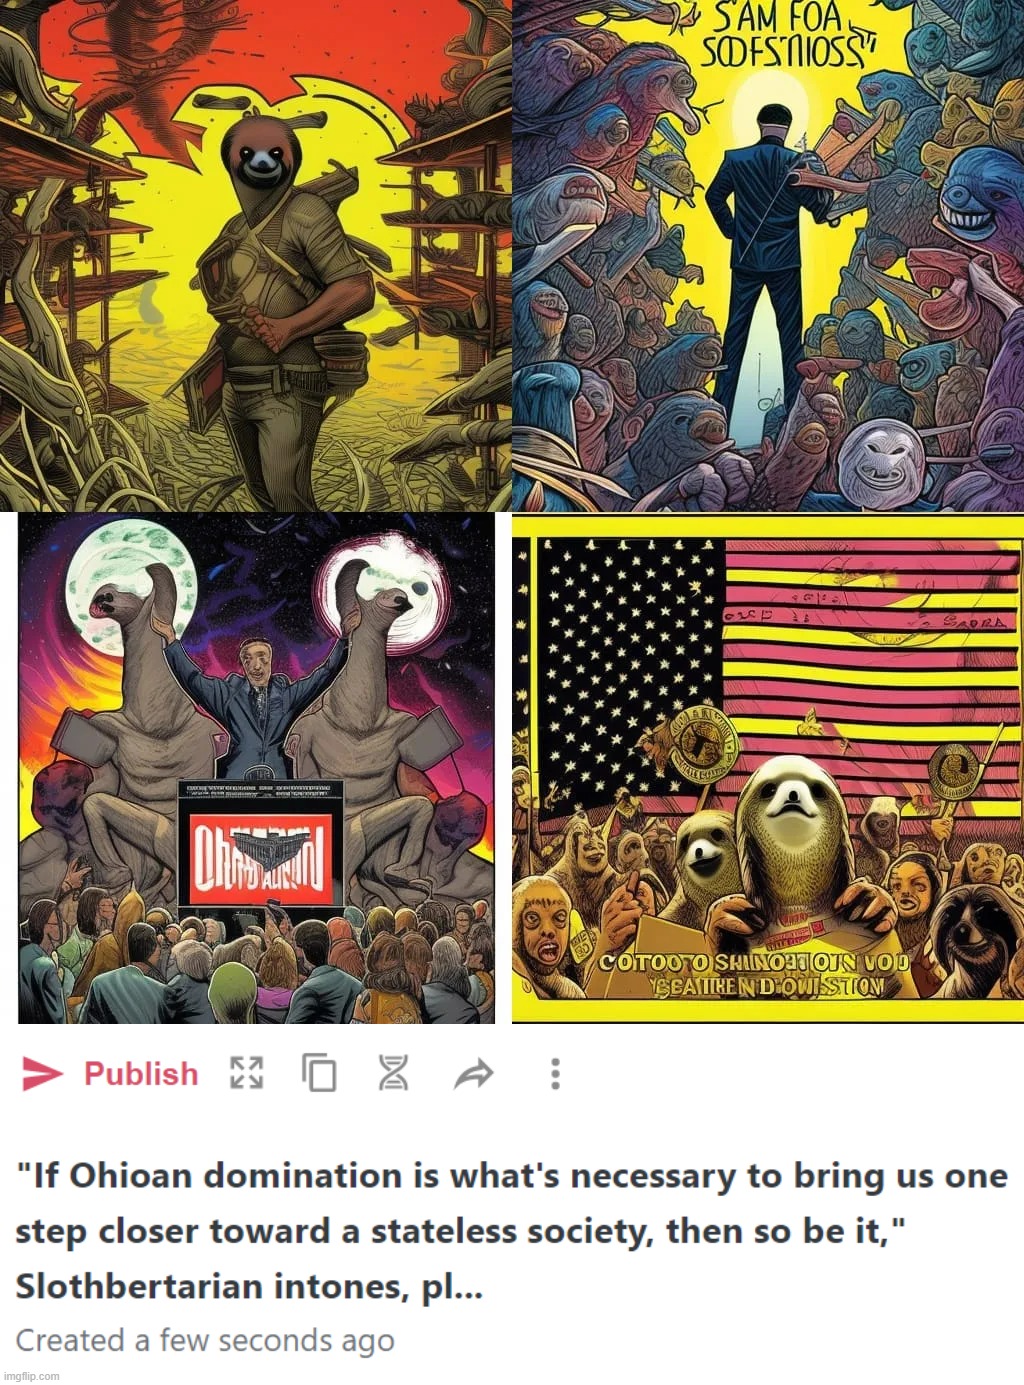 ...edging his loyalty - for now. | image tagged in slobertarian ohioan domination,slothbertarian,ohio,stateless society,ancap,ohioan domination | made w/ Imgflip meme maker